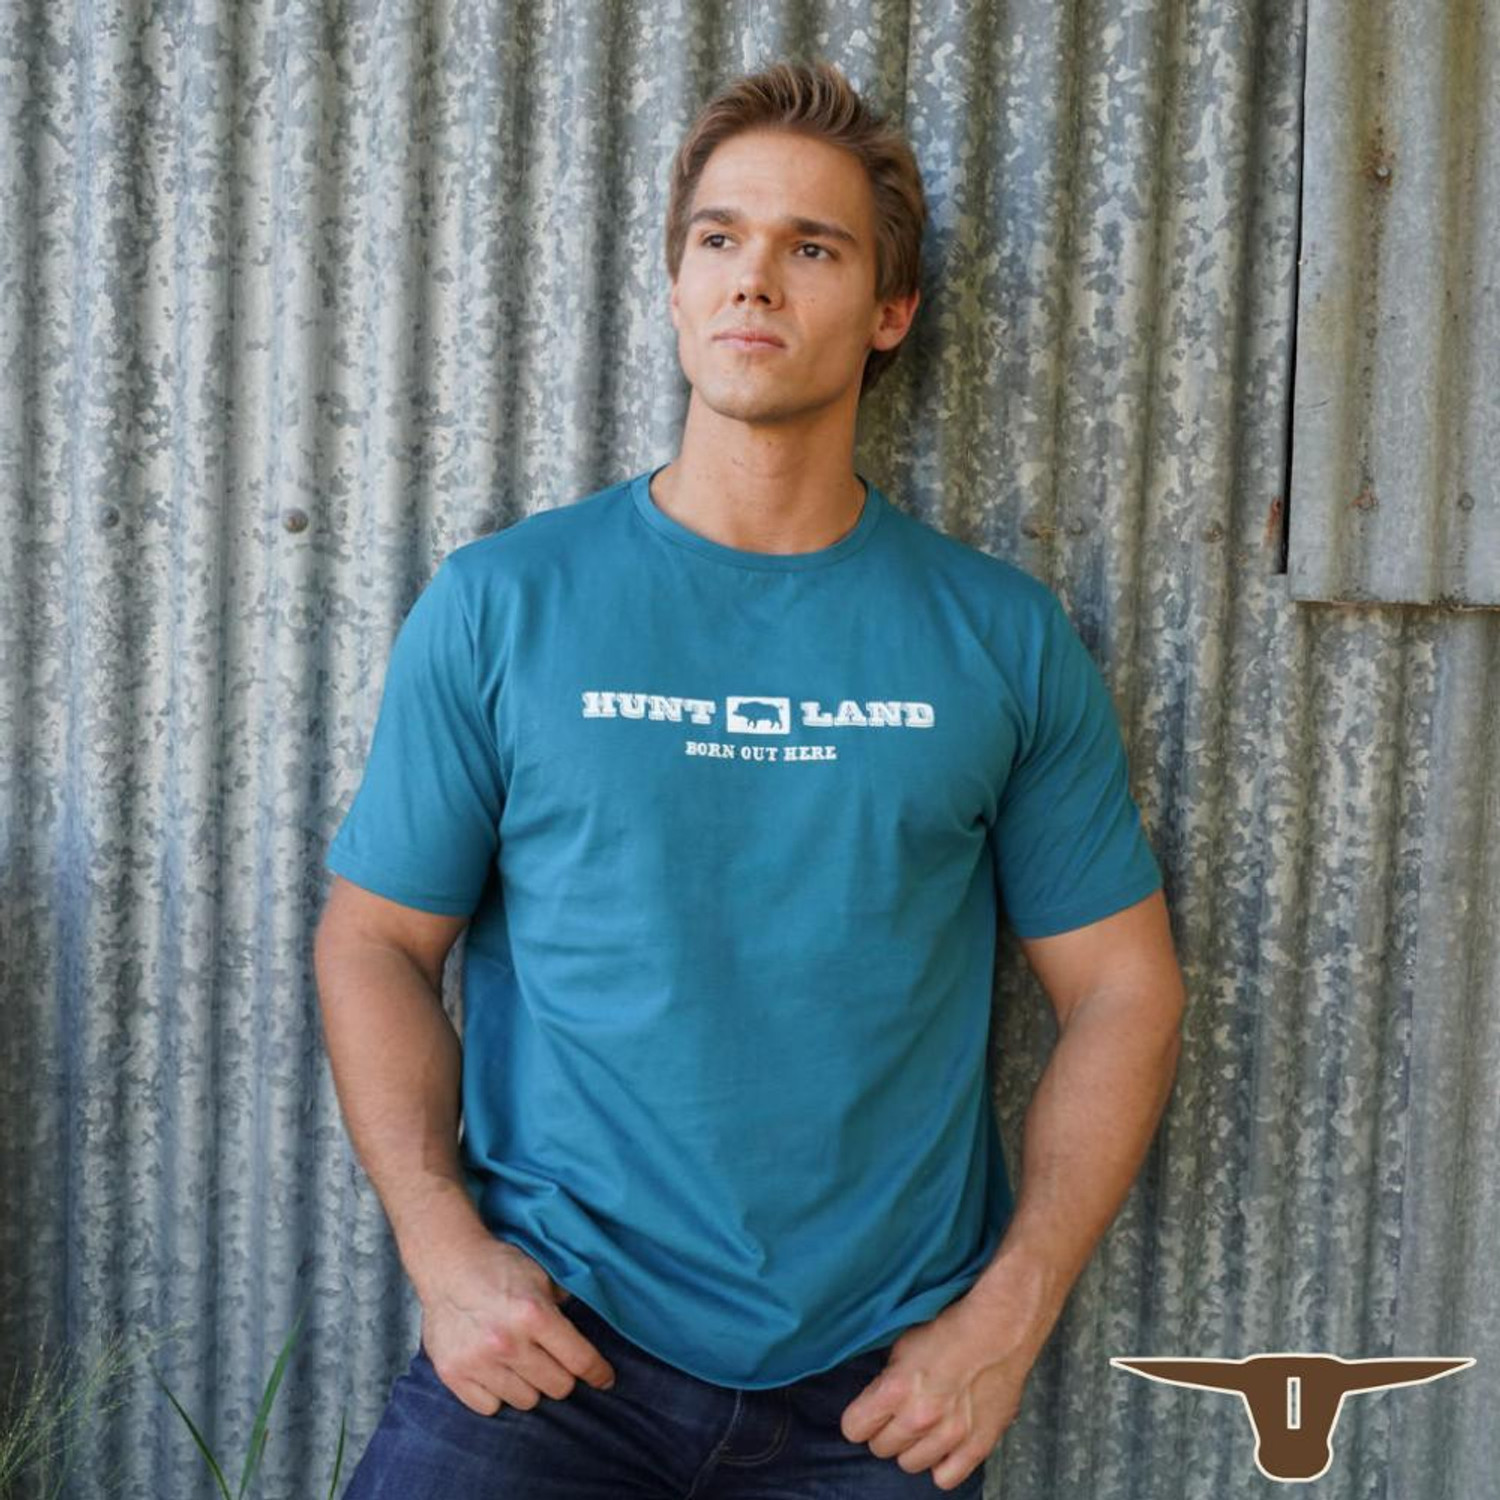  Born Out Here BMPT5 Hunt Land T-Shirt in Petrol (Buy 4 or more for $39.95 each) 